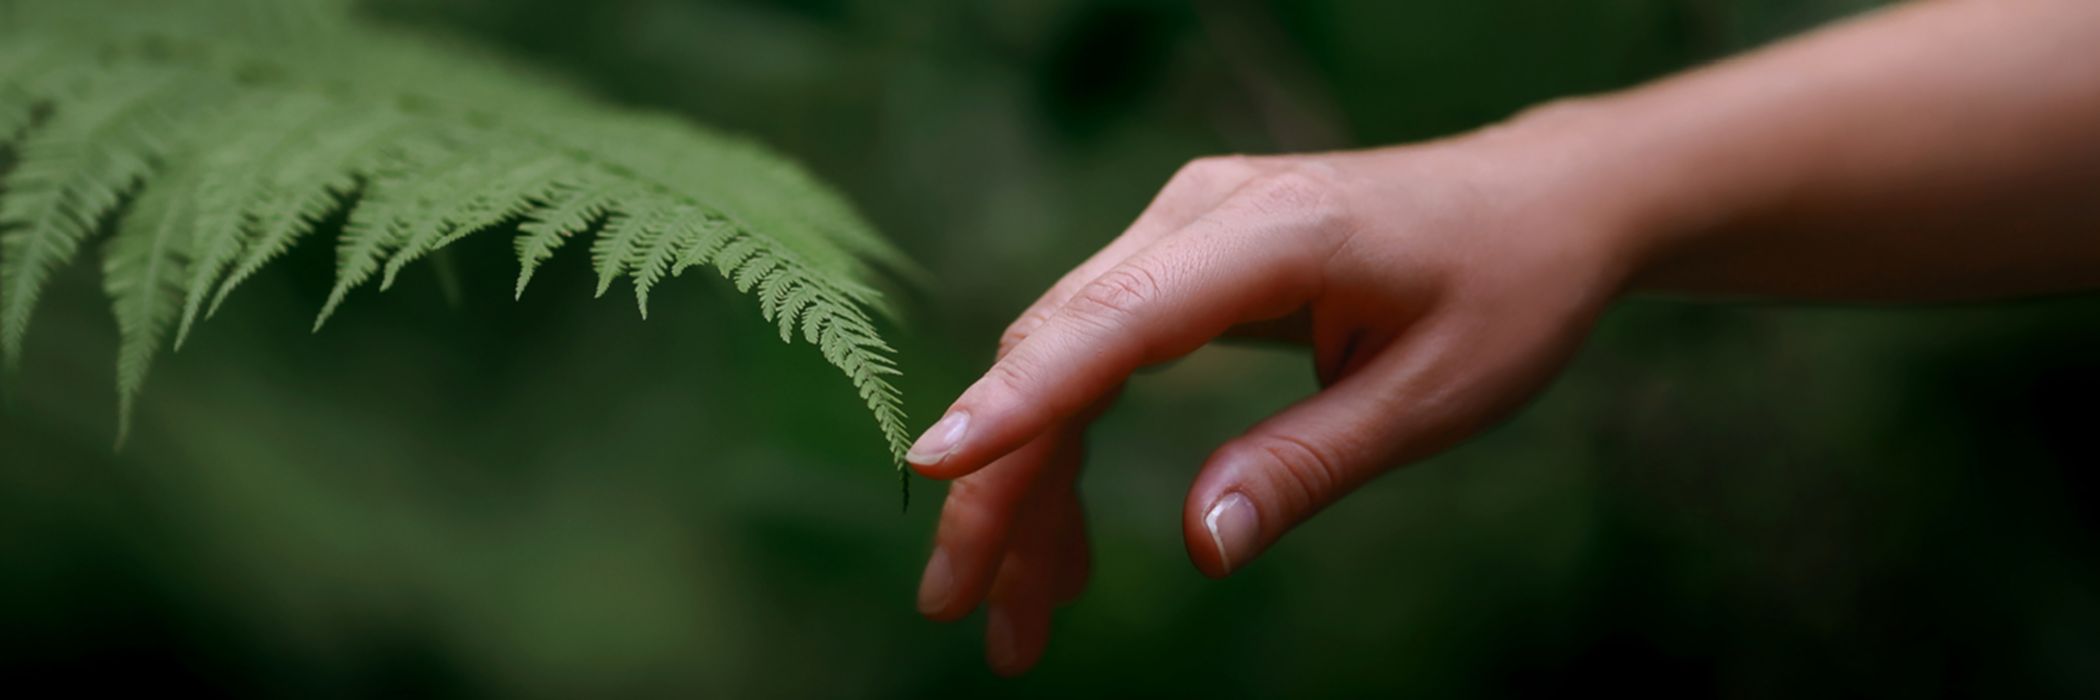 Hand touching a leaf